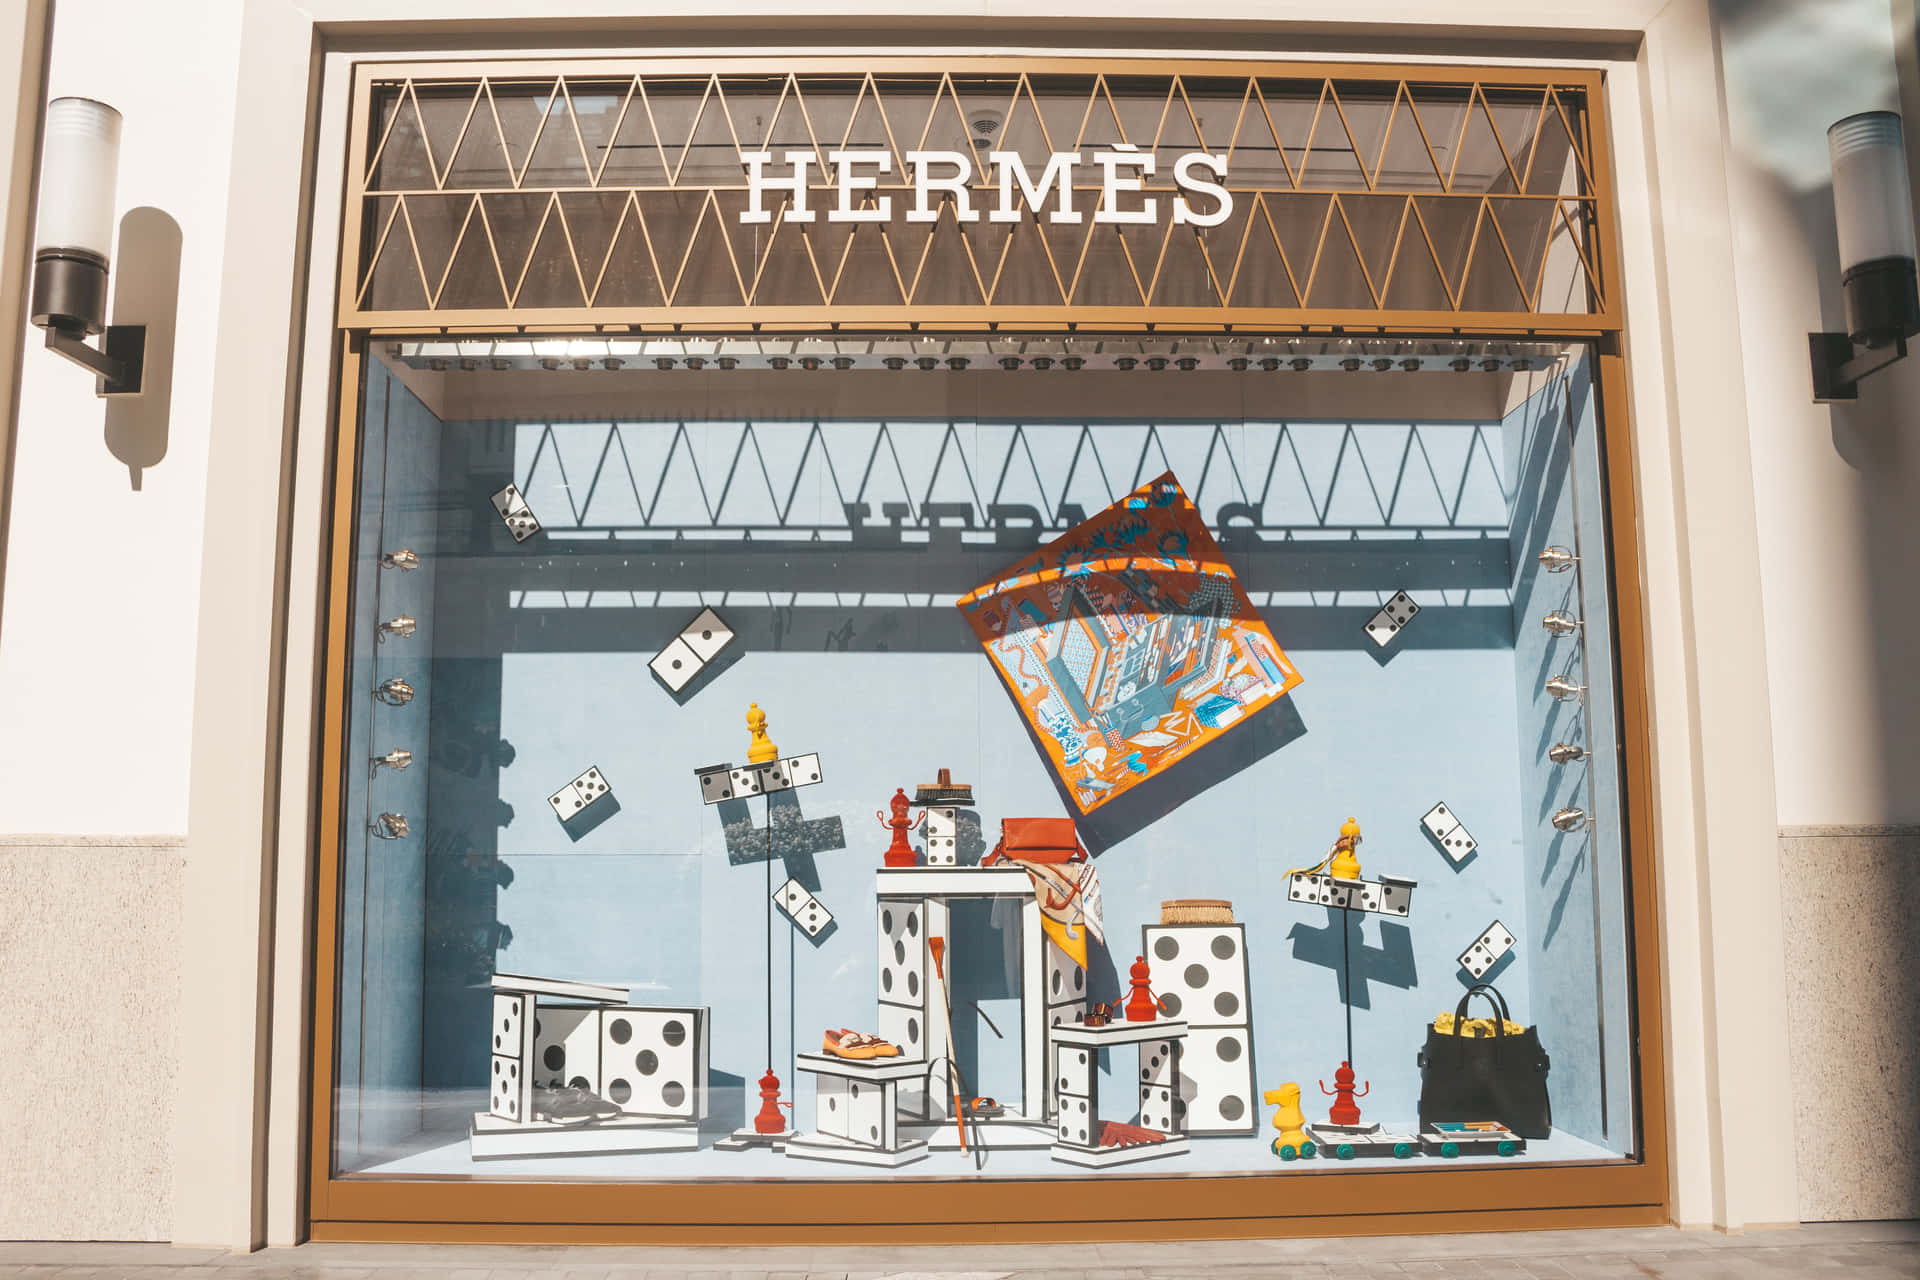 Hermes Store Window With A Display Of Toys